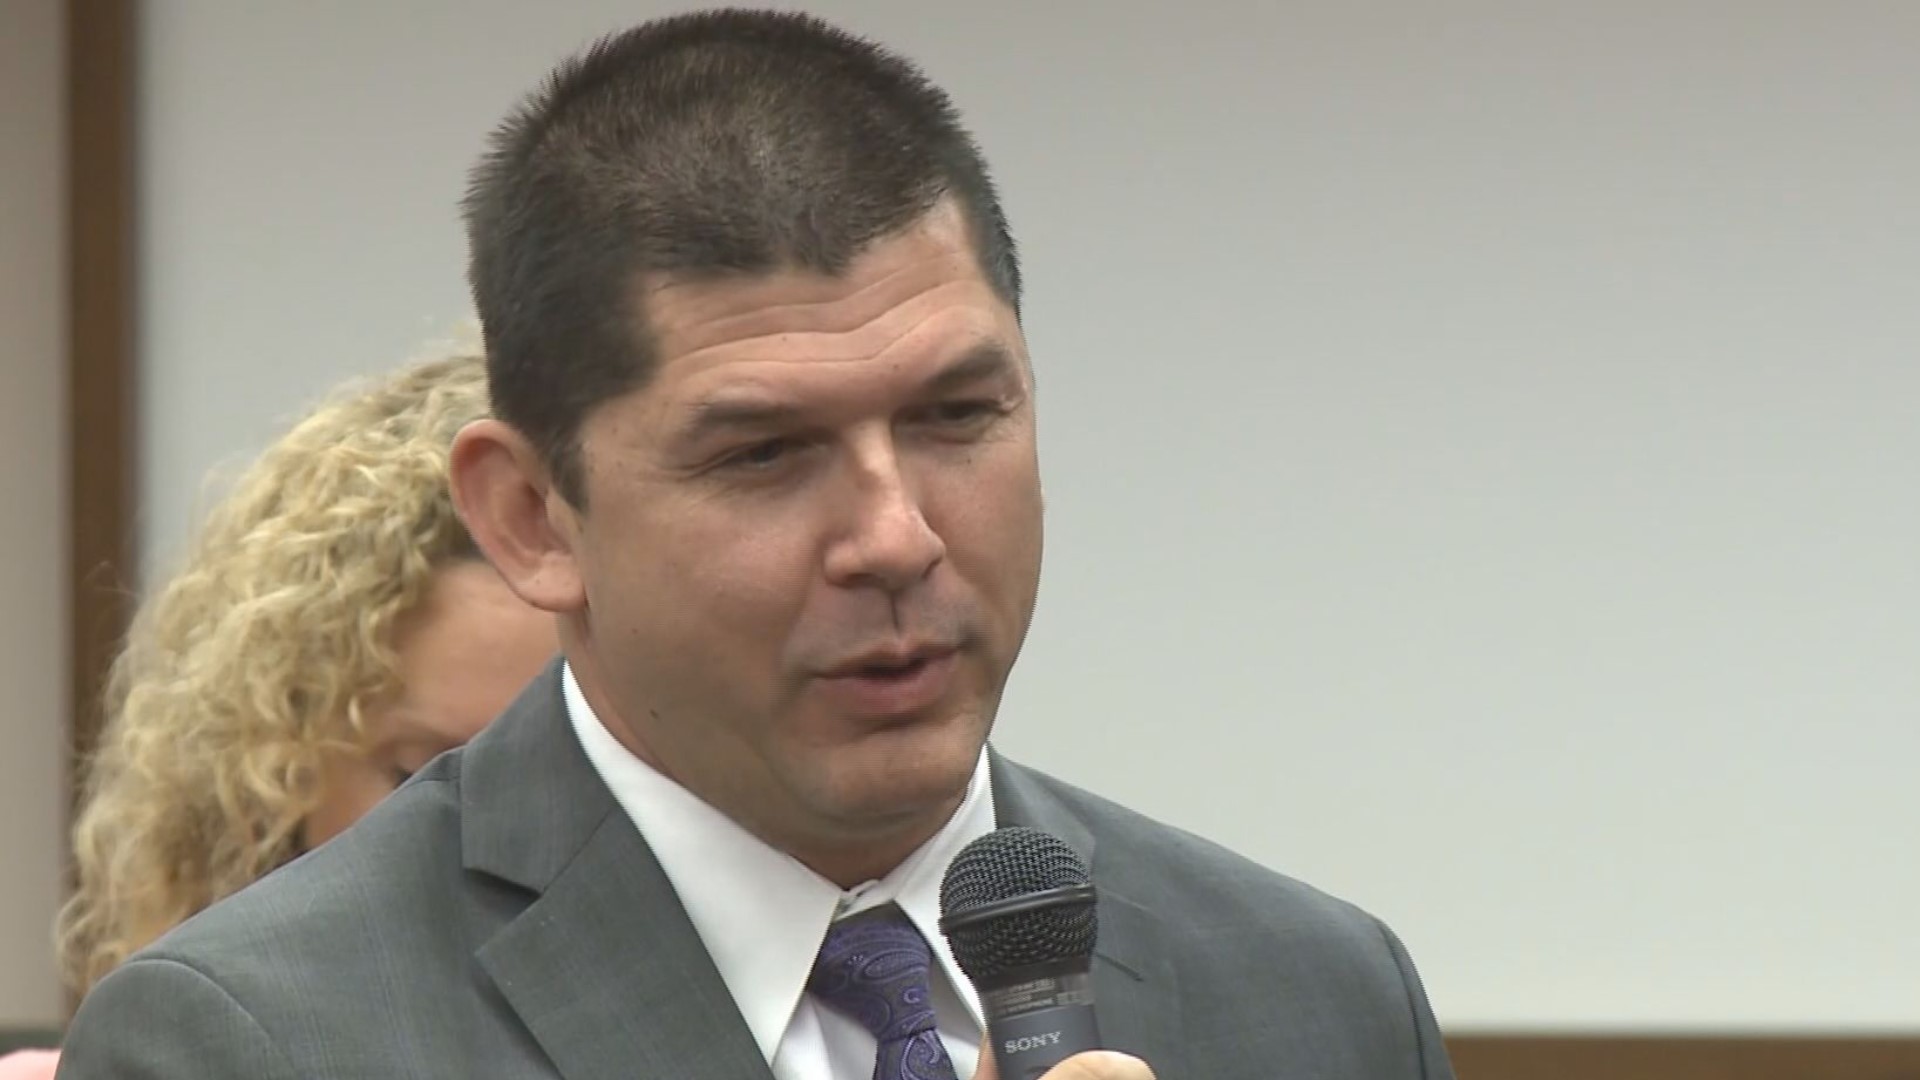 Former Stockton Mayor Anthony Silva pleaded no contest to a conflict of interest charge, on Monday, and, as part of the plea deal, all other allegations against him have been dropped.